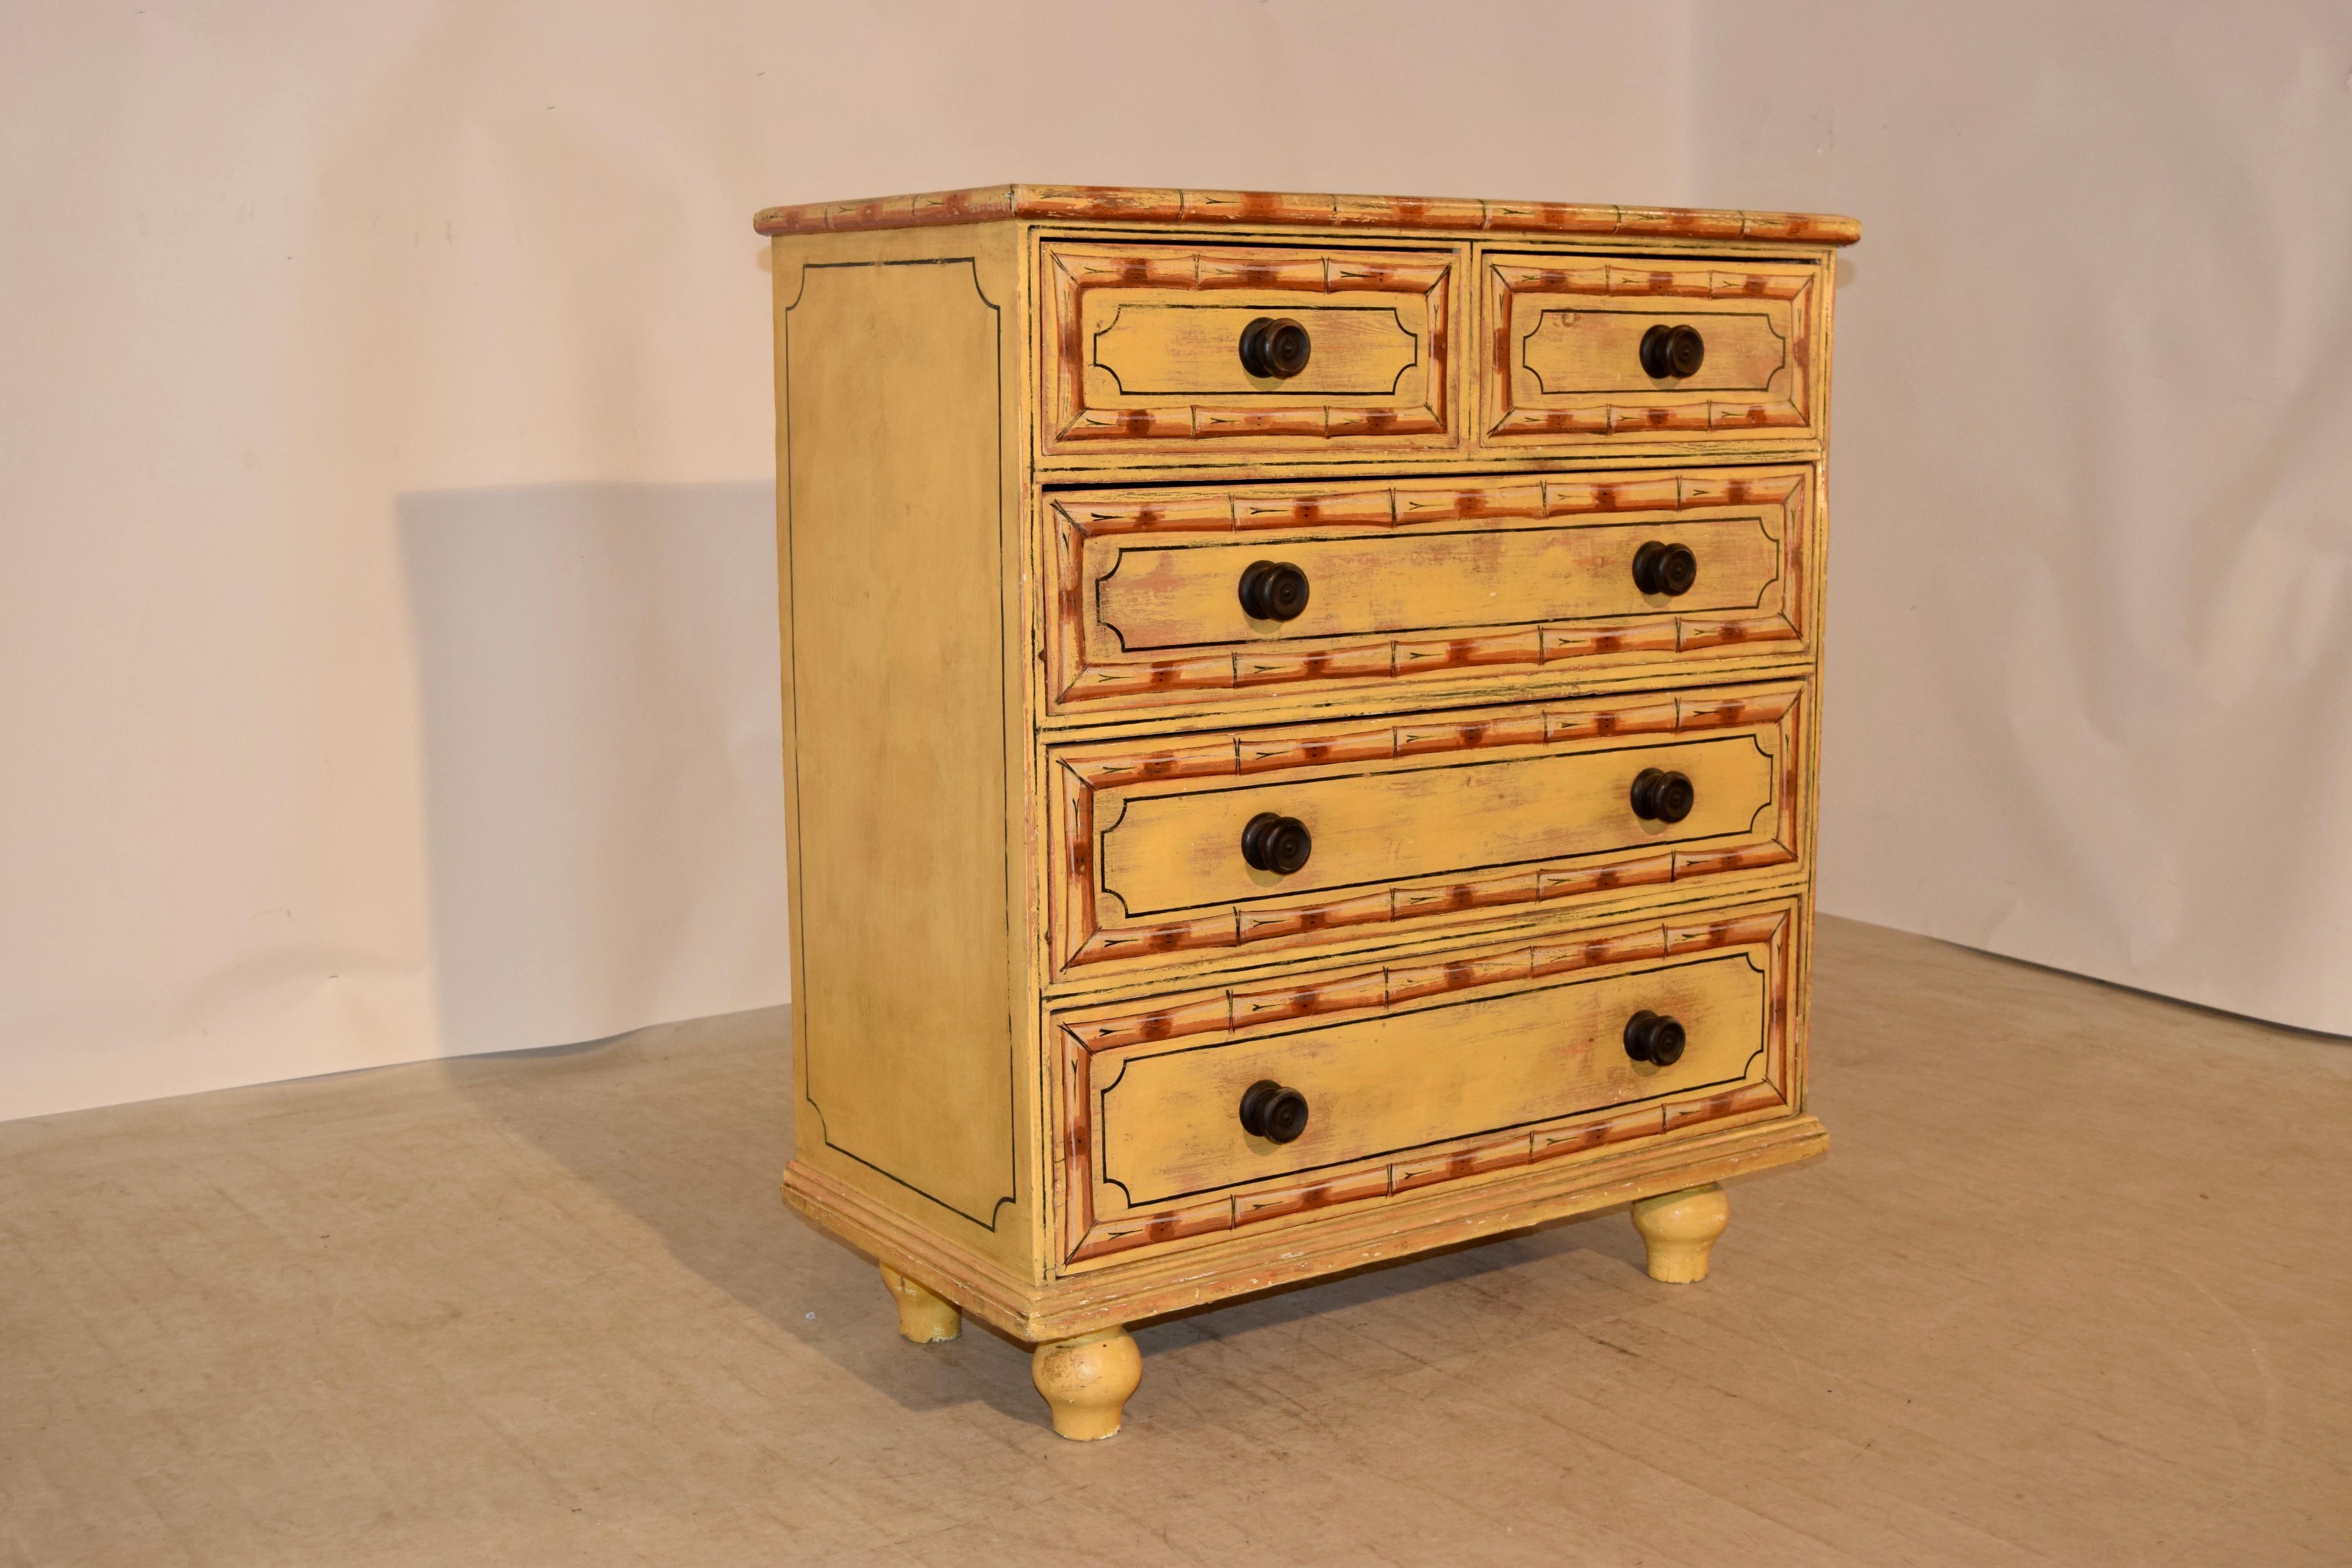 19th century English chest of drawers which has been faux painted to appear to have bamboo banding around the drawers and top. The sides are simple, and have faux painted panels as well. The case has two drawers over three drawers configuration, and